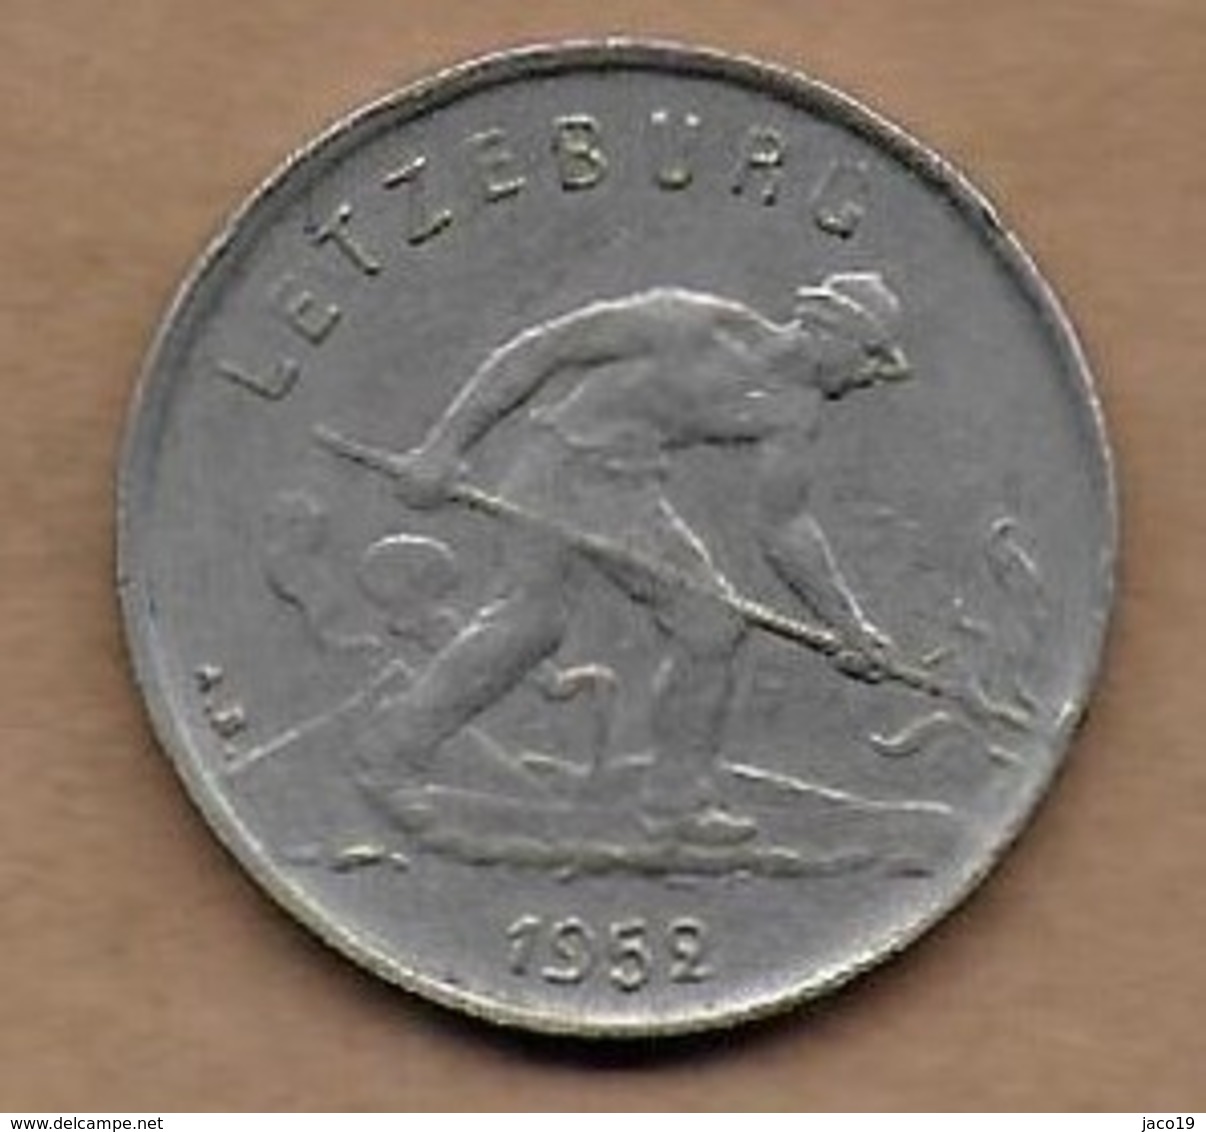 1 Franc 1952 - Luxembourg